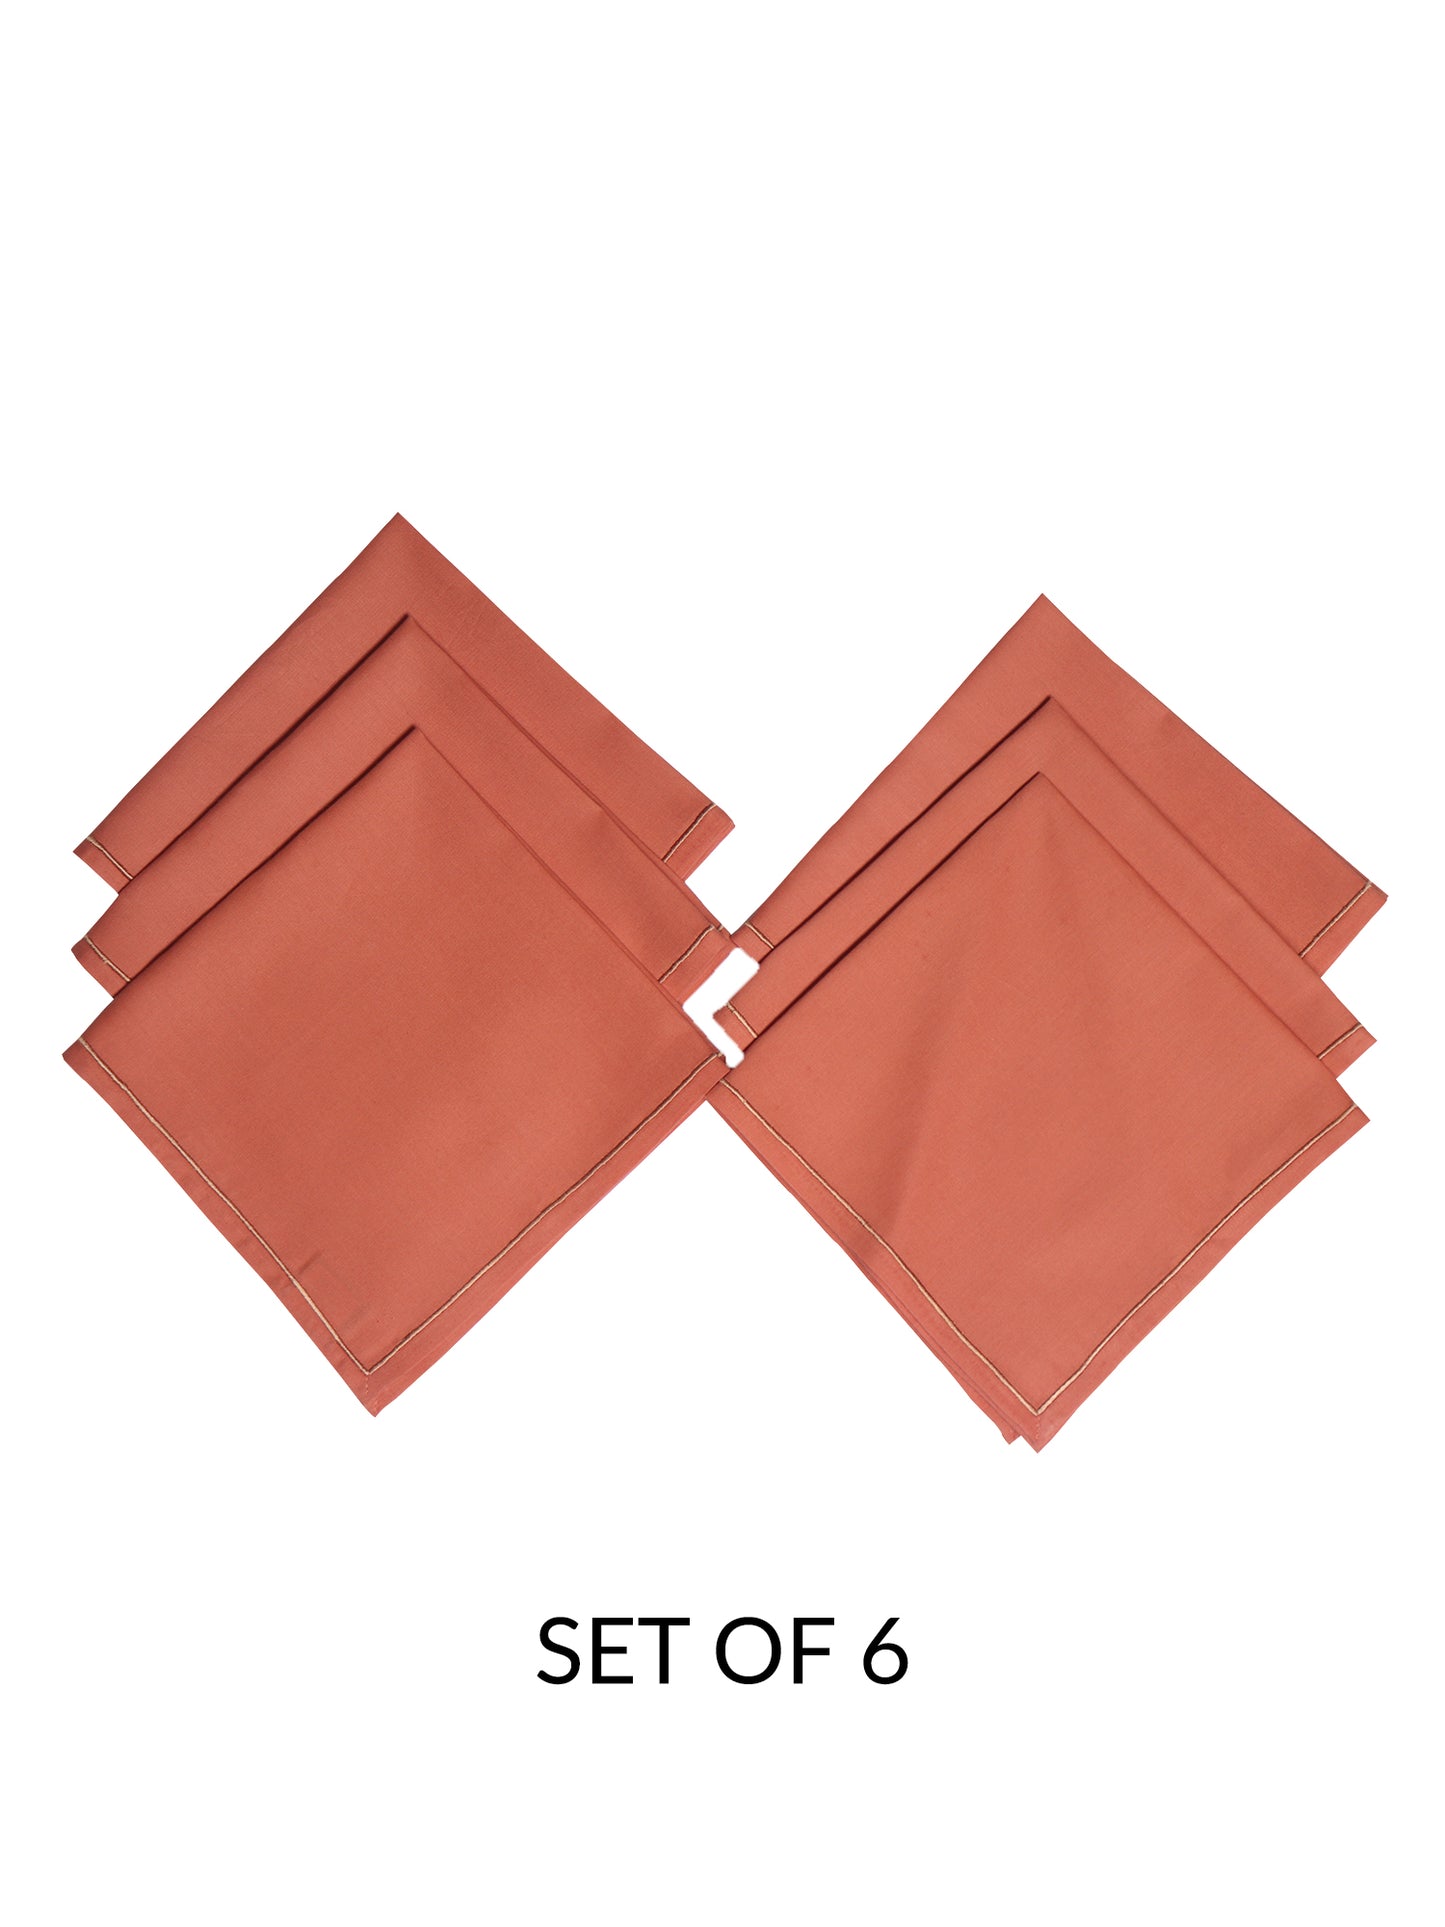 embroidered set of 6 dinner napkins in cark coral color - 16x16 inch